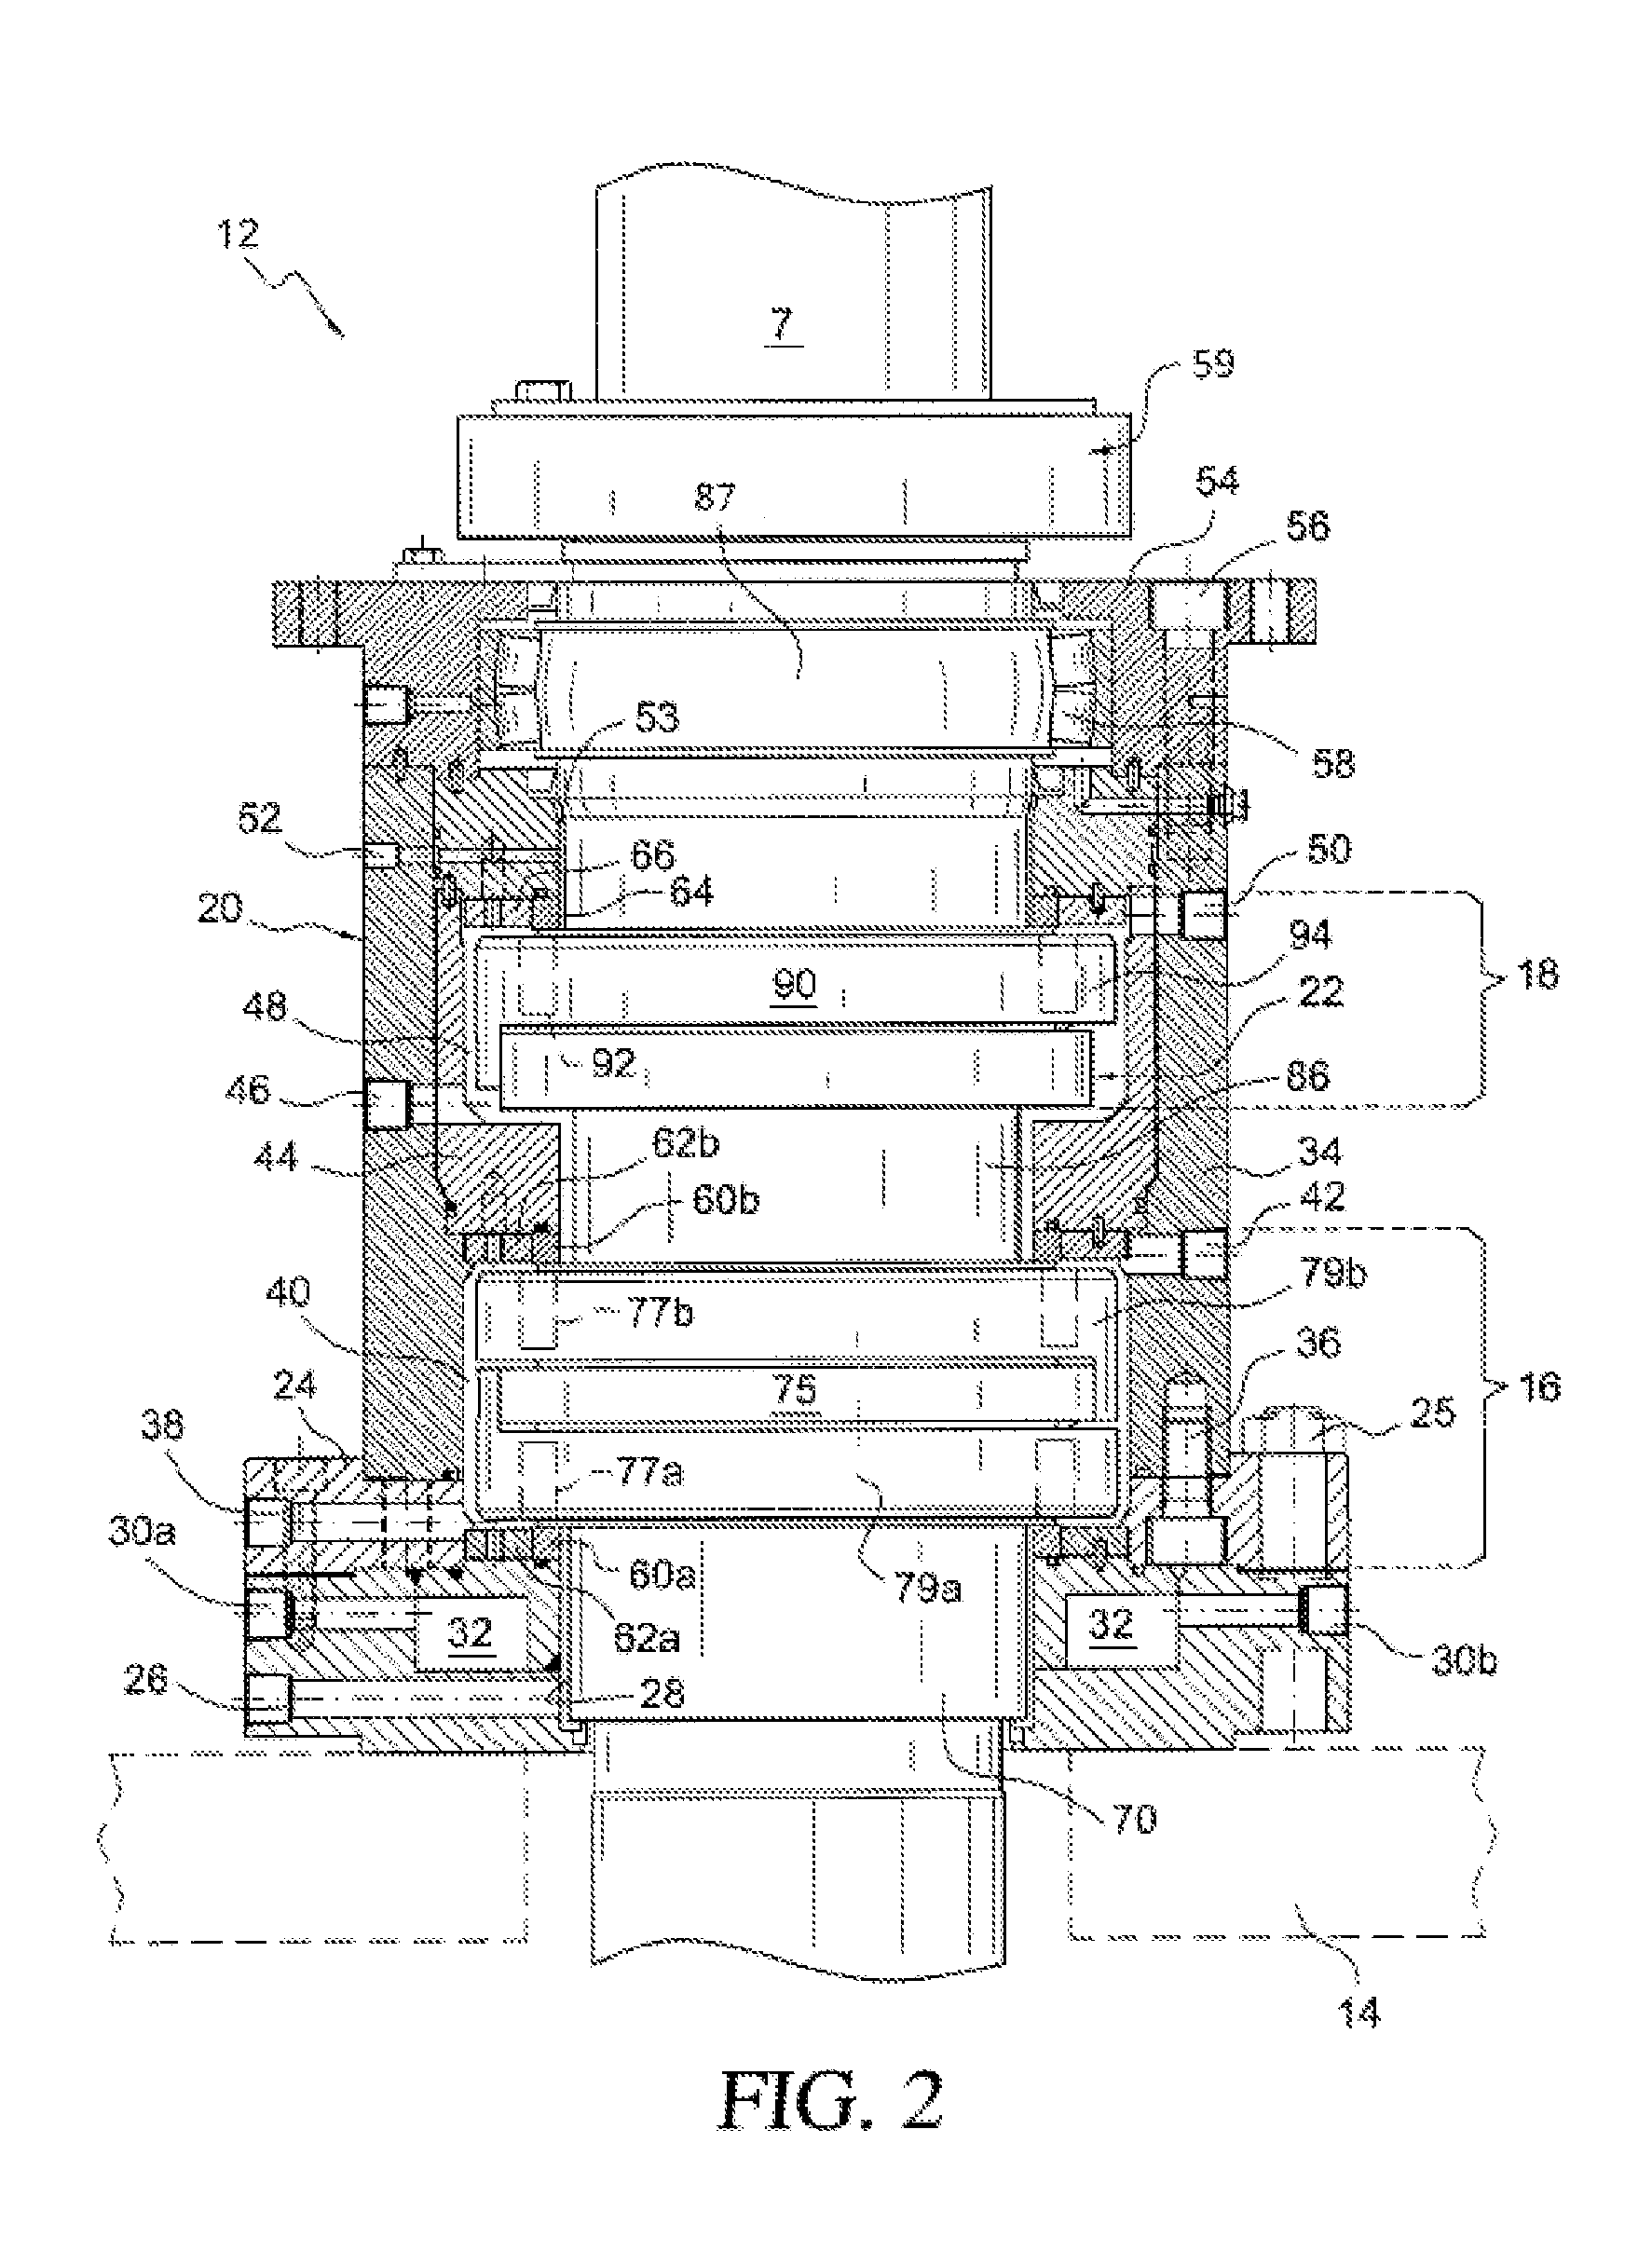 Polymerization reactor and related process